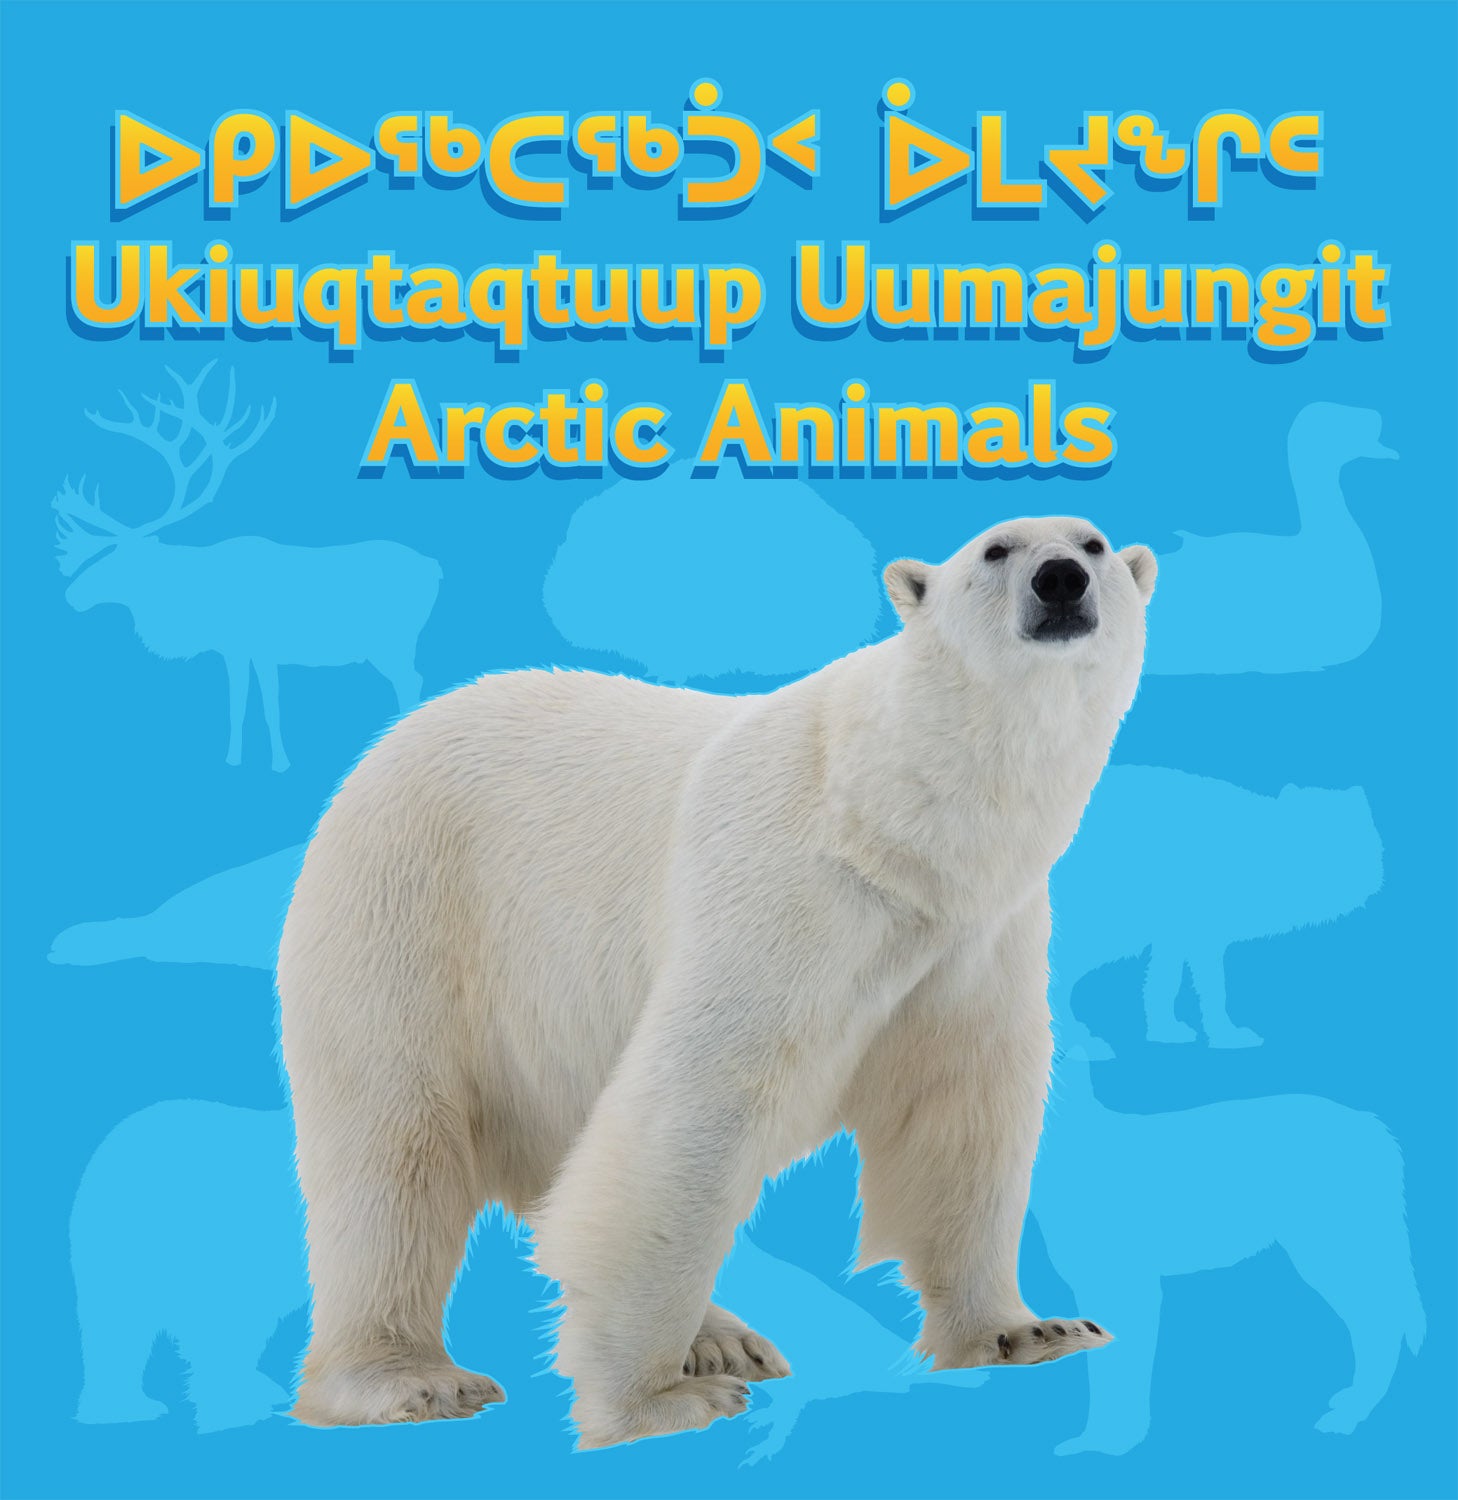 English/Inuktitut Cover